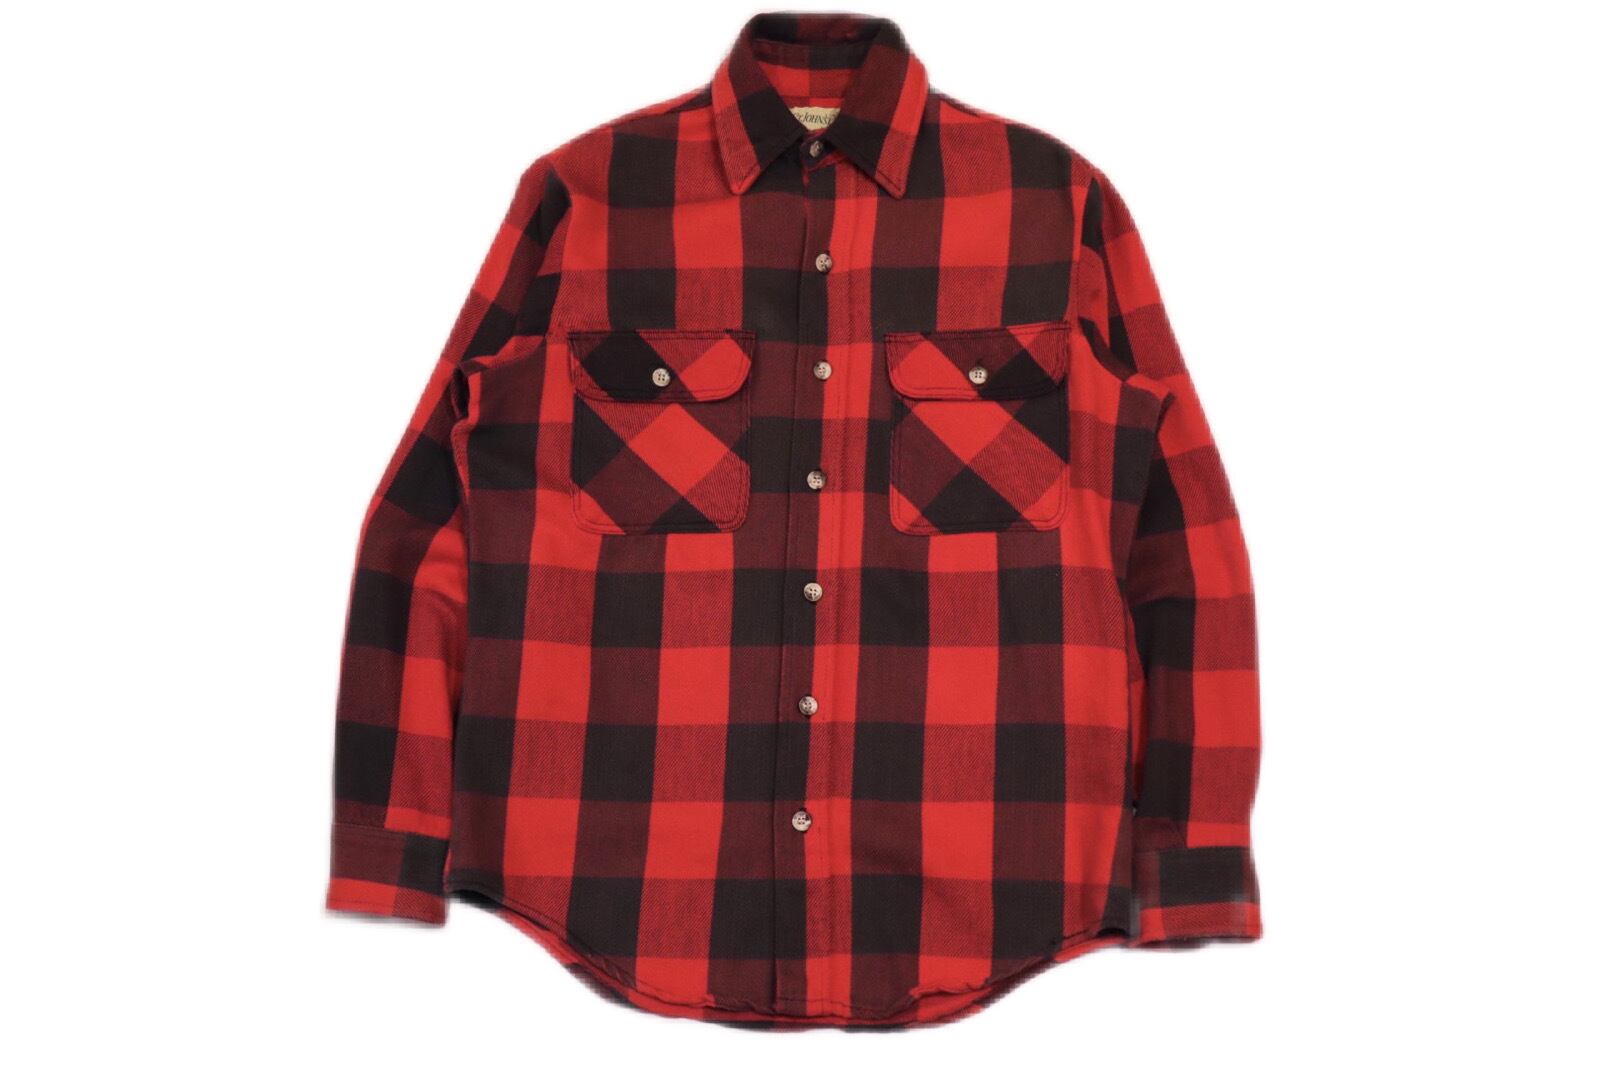 USED 90s ST JOHN'S BAY Heavy flannel shirt - Small 01940